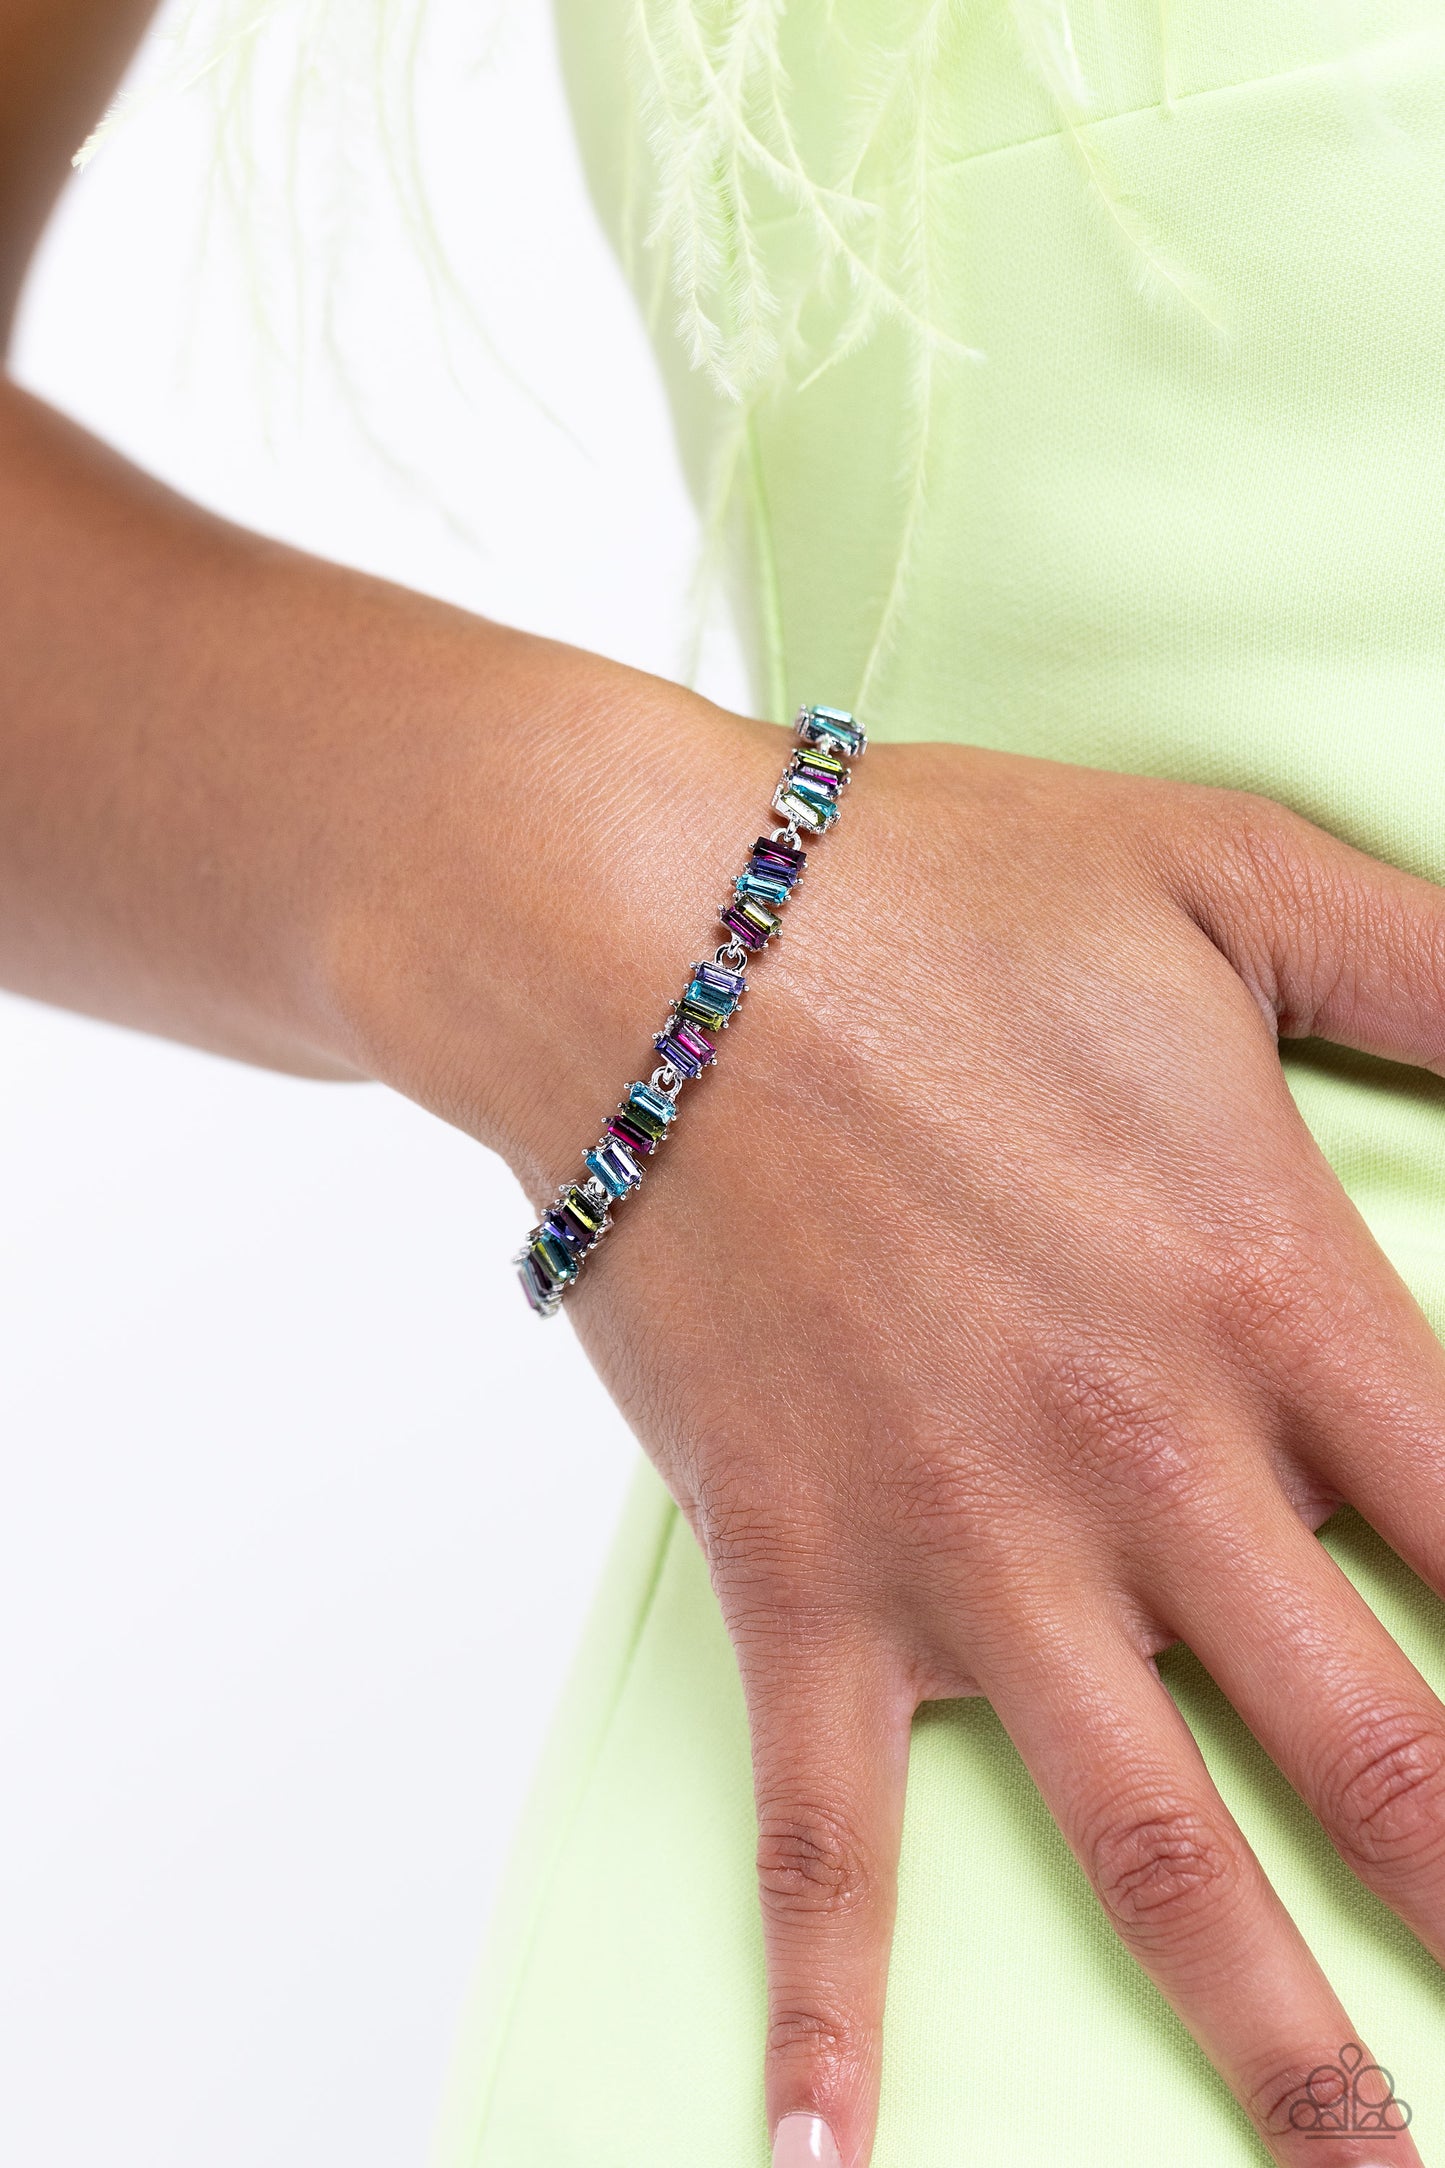 PERFECT MATCH / SET: Easygoing Emeralds - Multi Color Gem Silver Layered Short Necklace AND Emerald Ensemble - Multi Color Gem Silver Clasp Bracelet